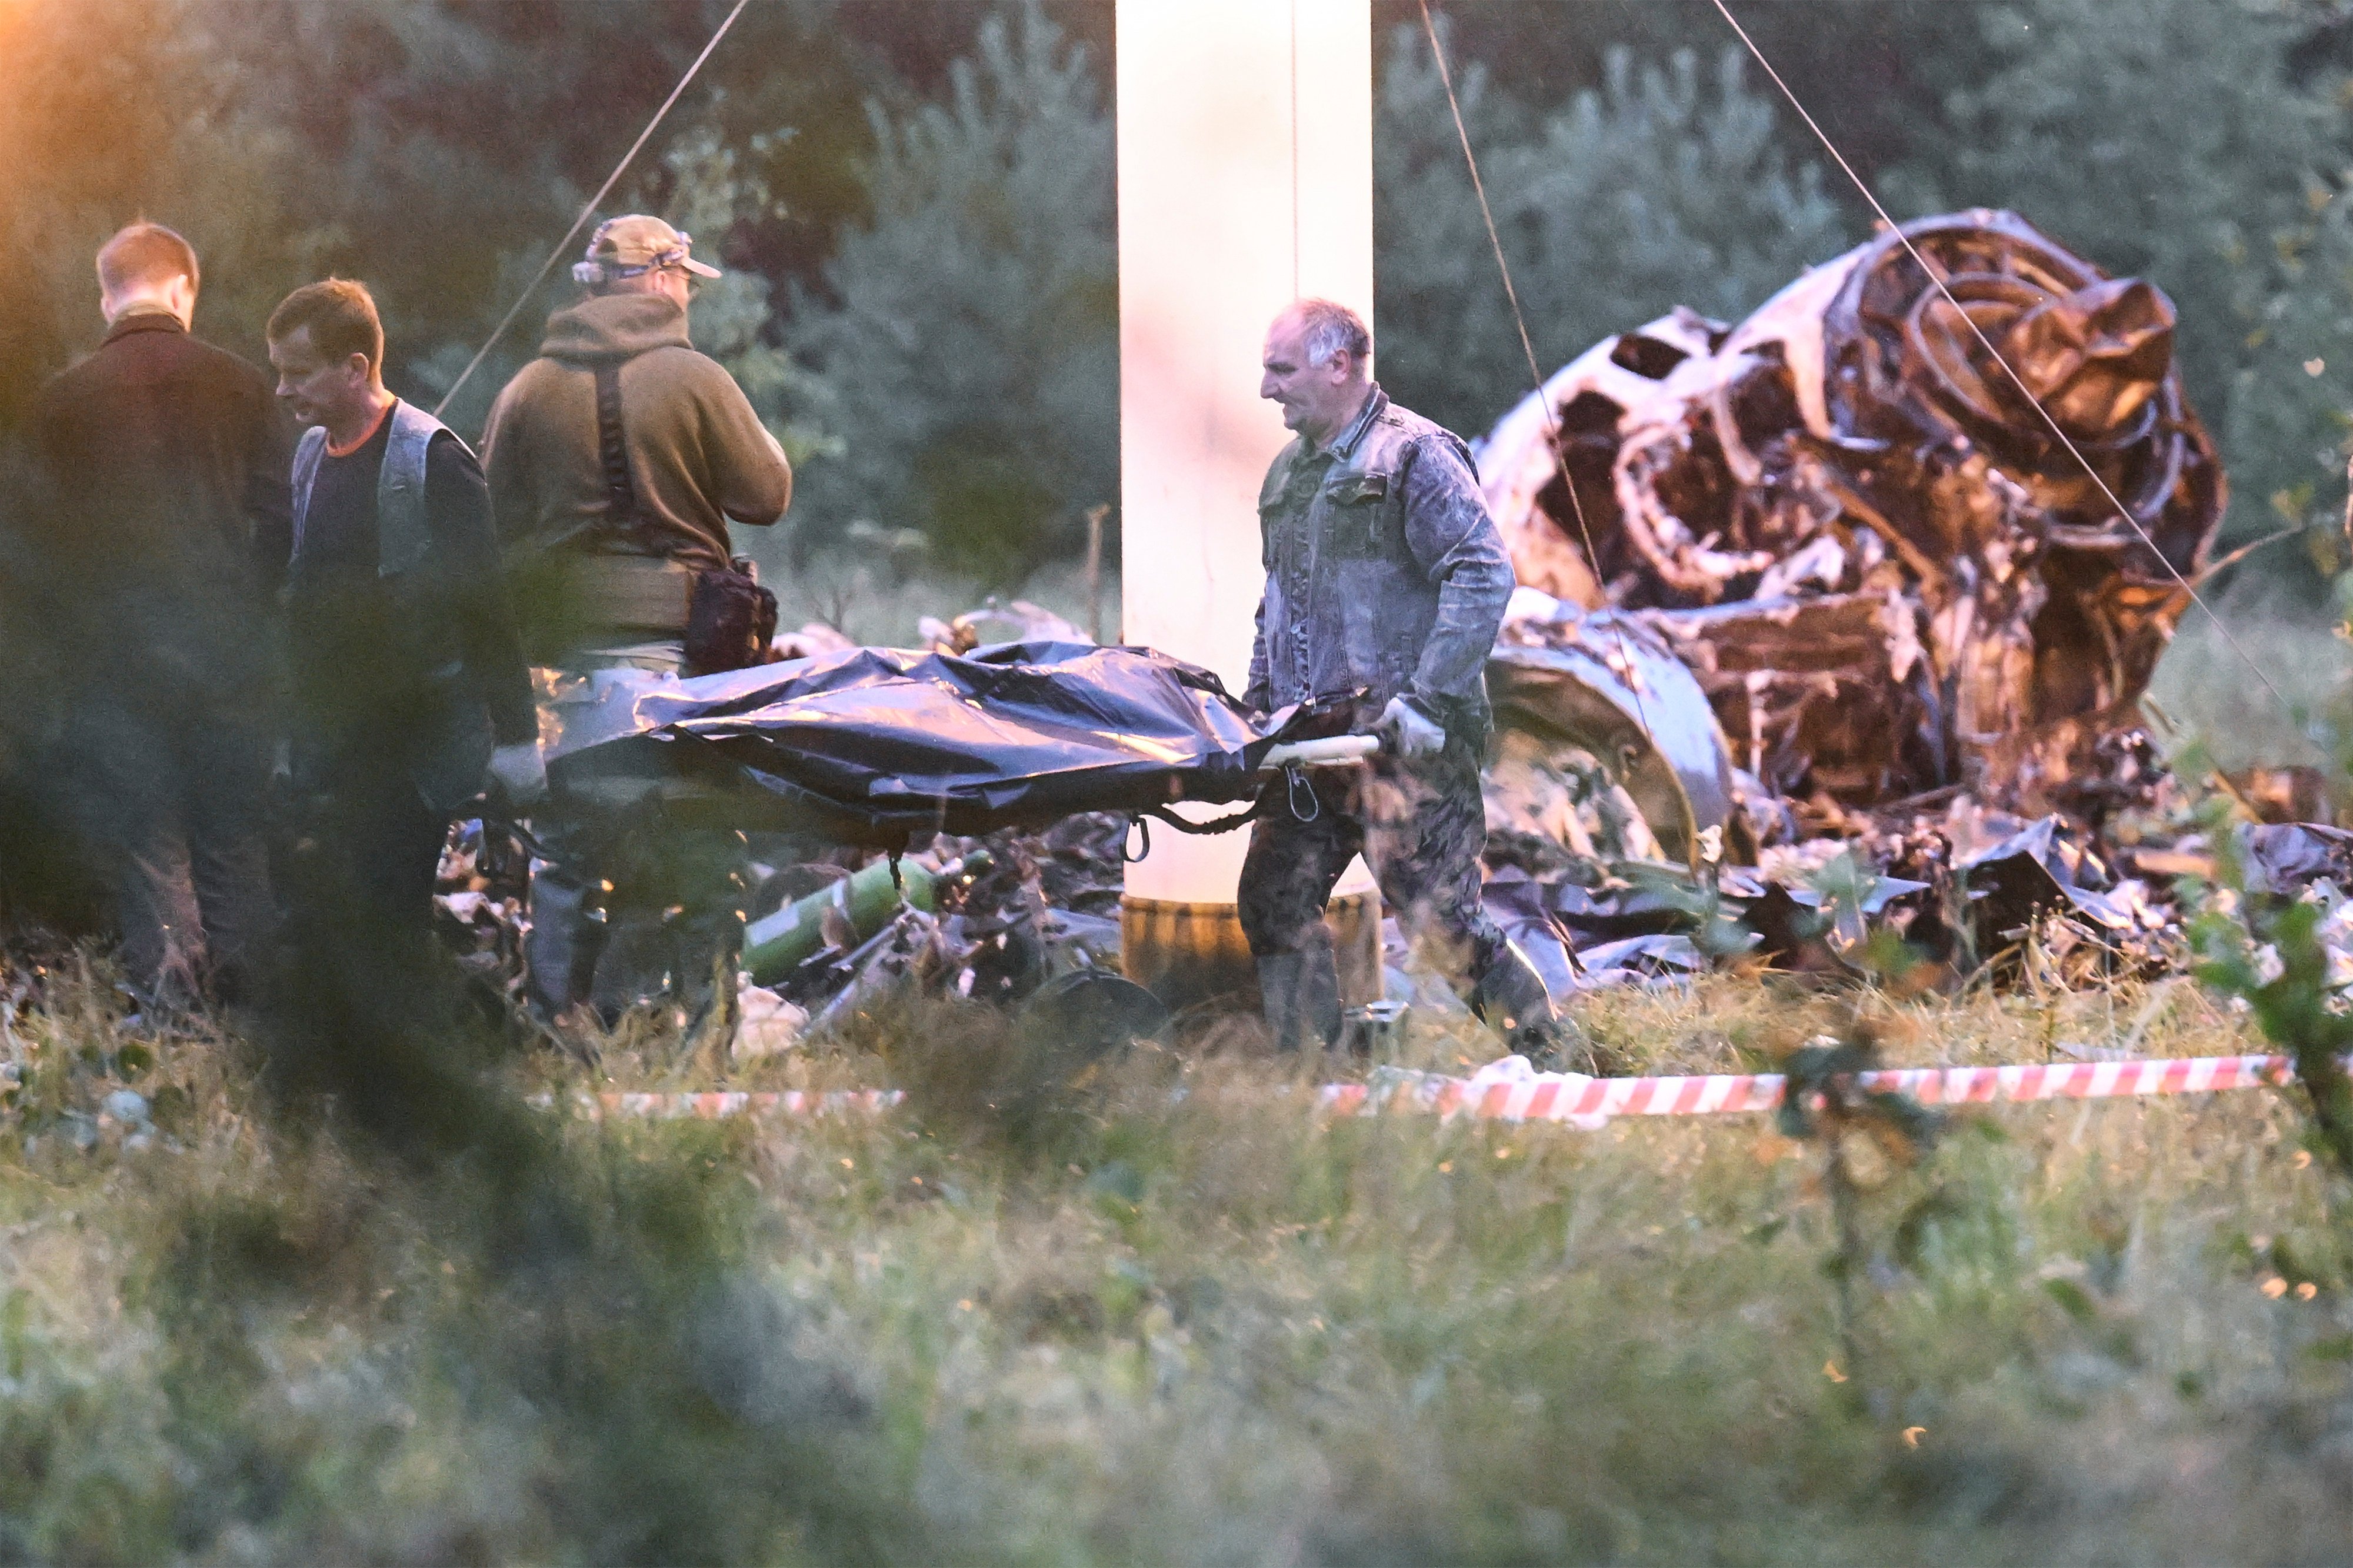 People carry a body bag away from the wreckage of the crashed jet. Photo: AP